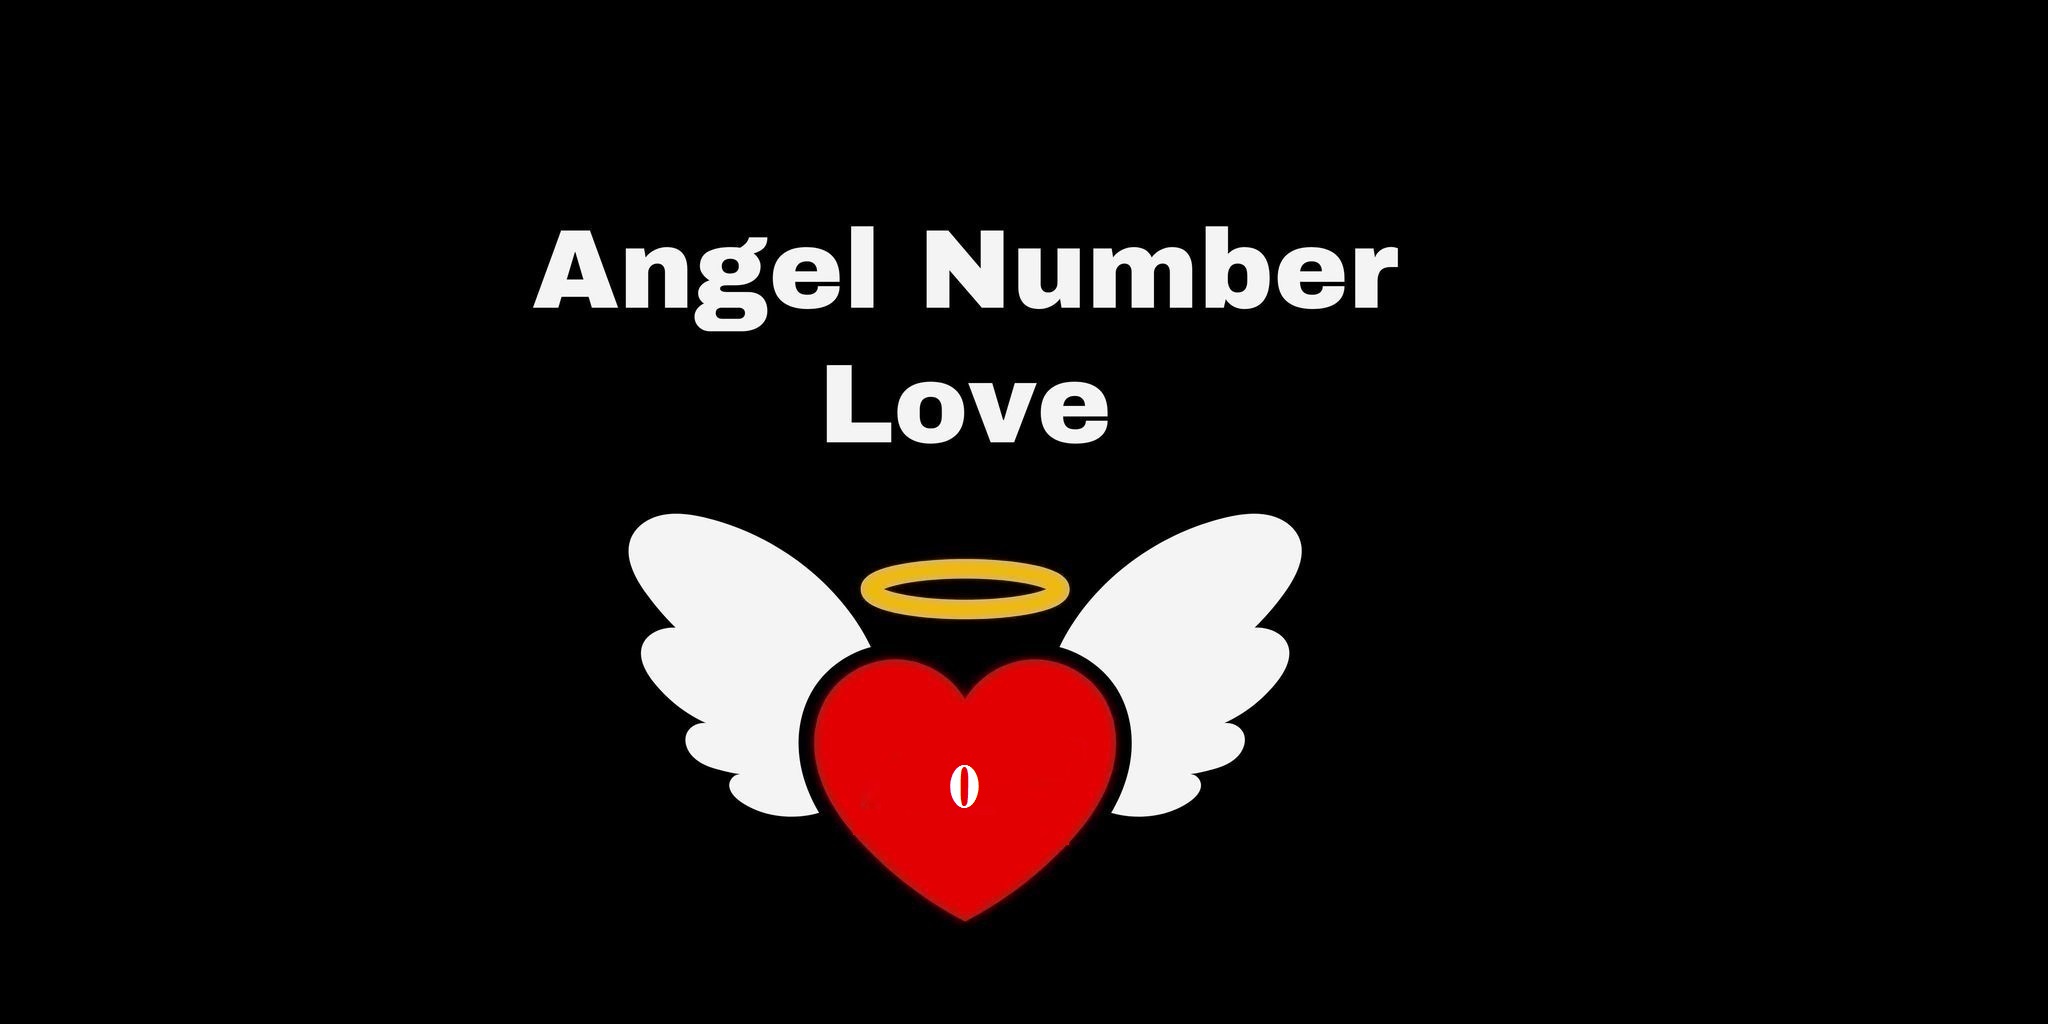 0 Angel Number Meaning In Love